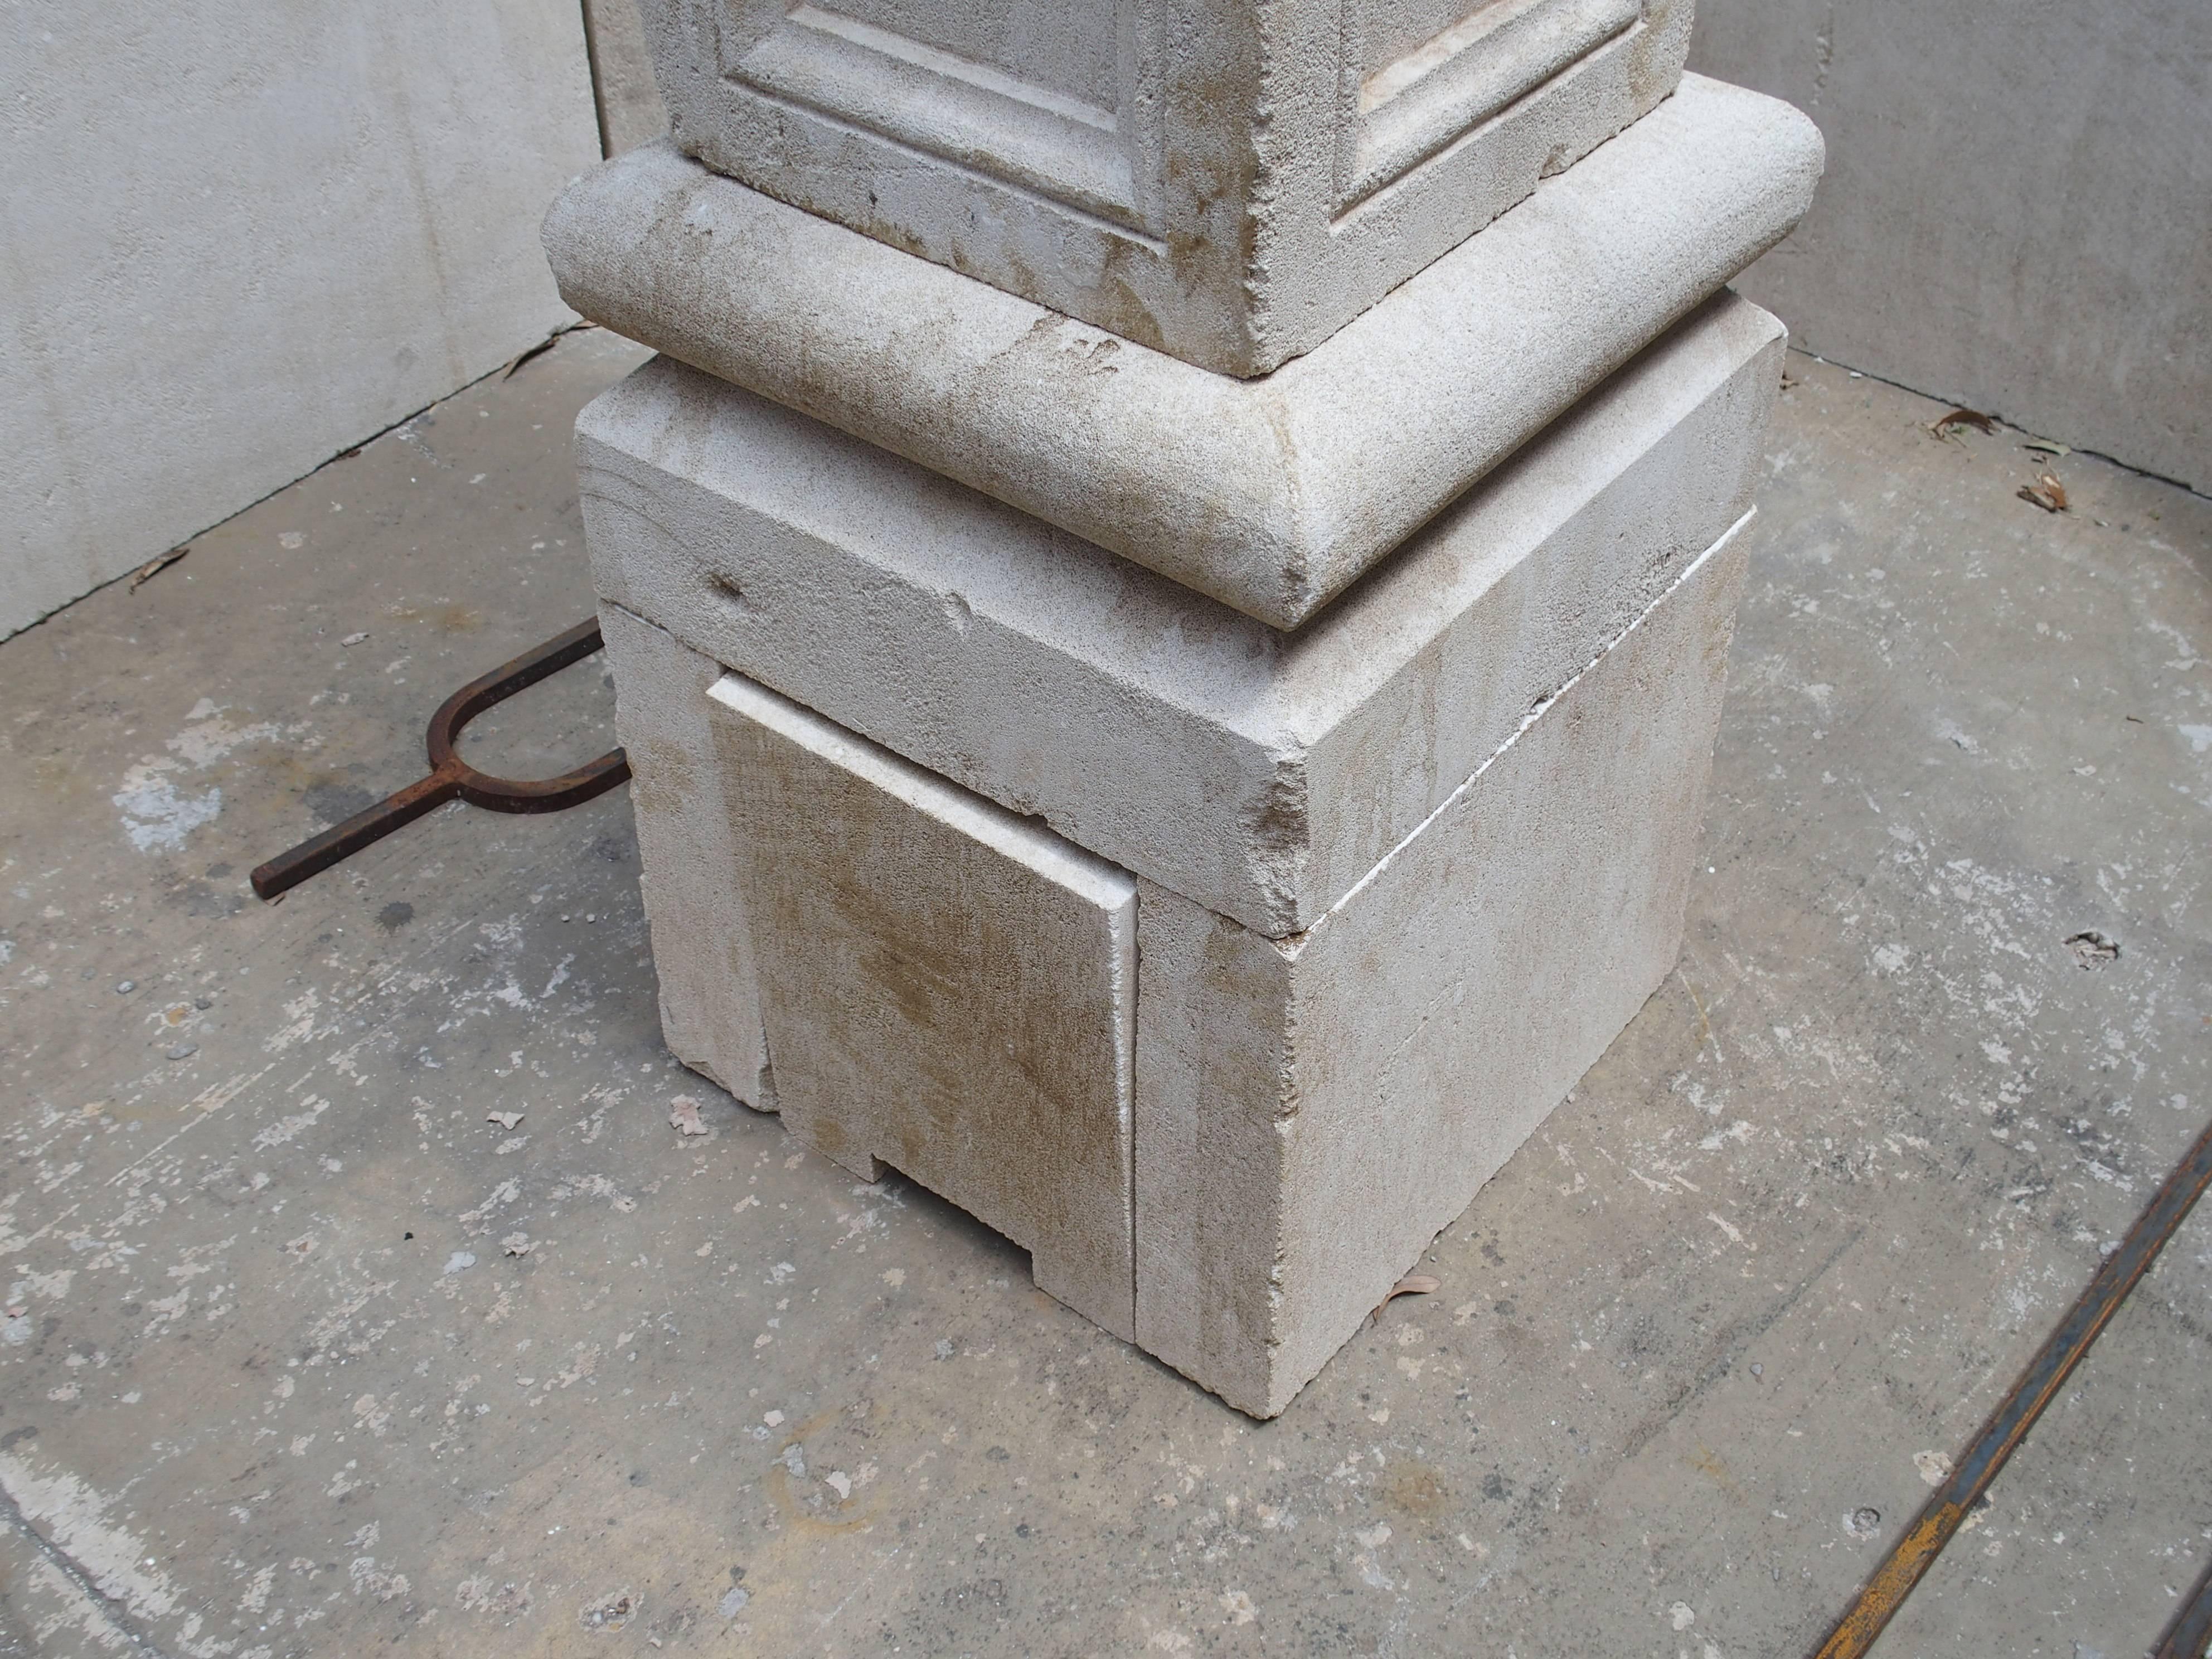 This beautiful French centre fountain from Provence has been hand-carved and distressed out of Estaillade limestone. The centre post has a ball finial, while four sides having recessed panels with stylized ogee moldings. The ball portion can be left